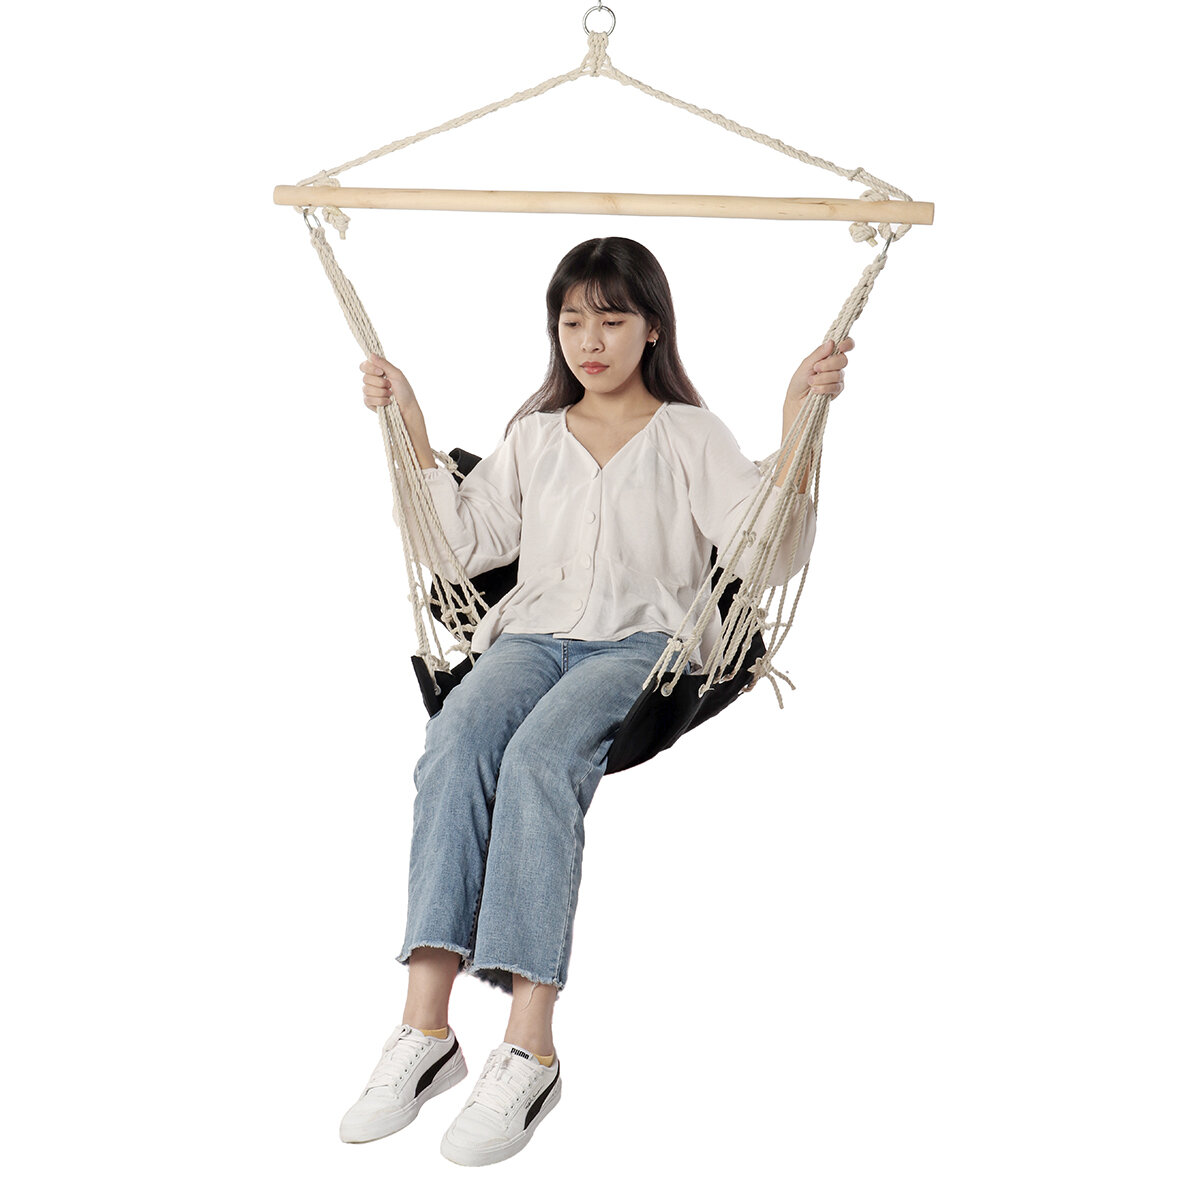 100*50cm 160kg Max Load Cotton Hammock Chair Simple Comfortable Hanging Seat Outdoor Garden Swing Max Load 160kg